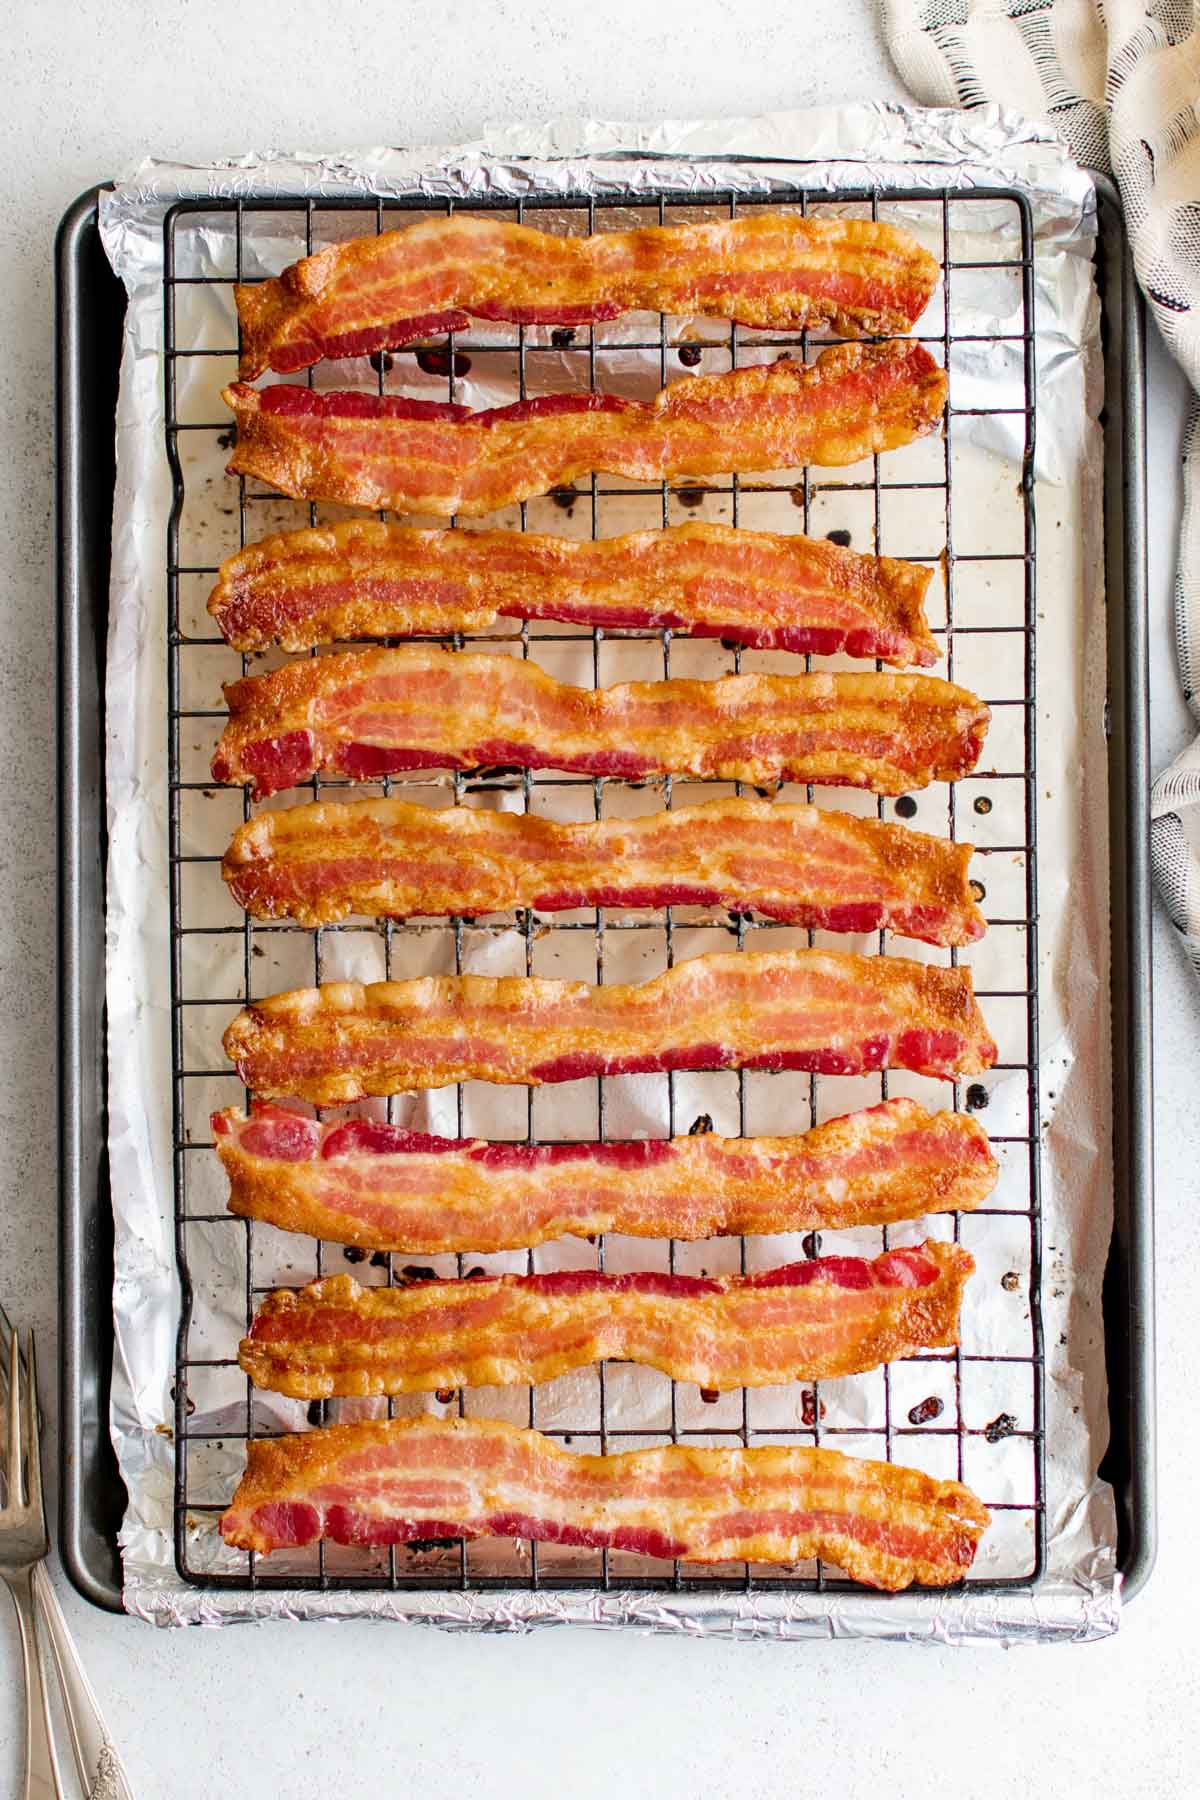 Bacon on a baking rack and baking sheet.